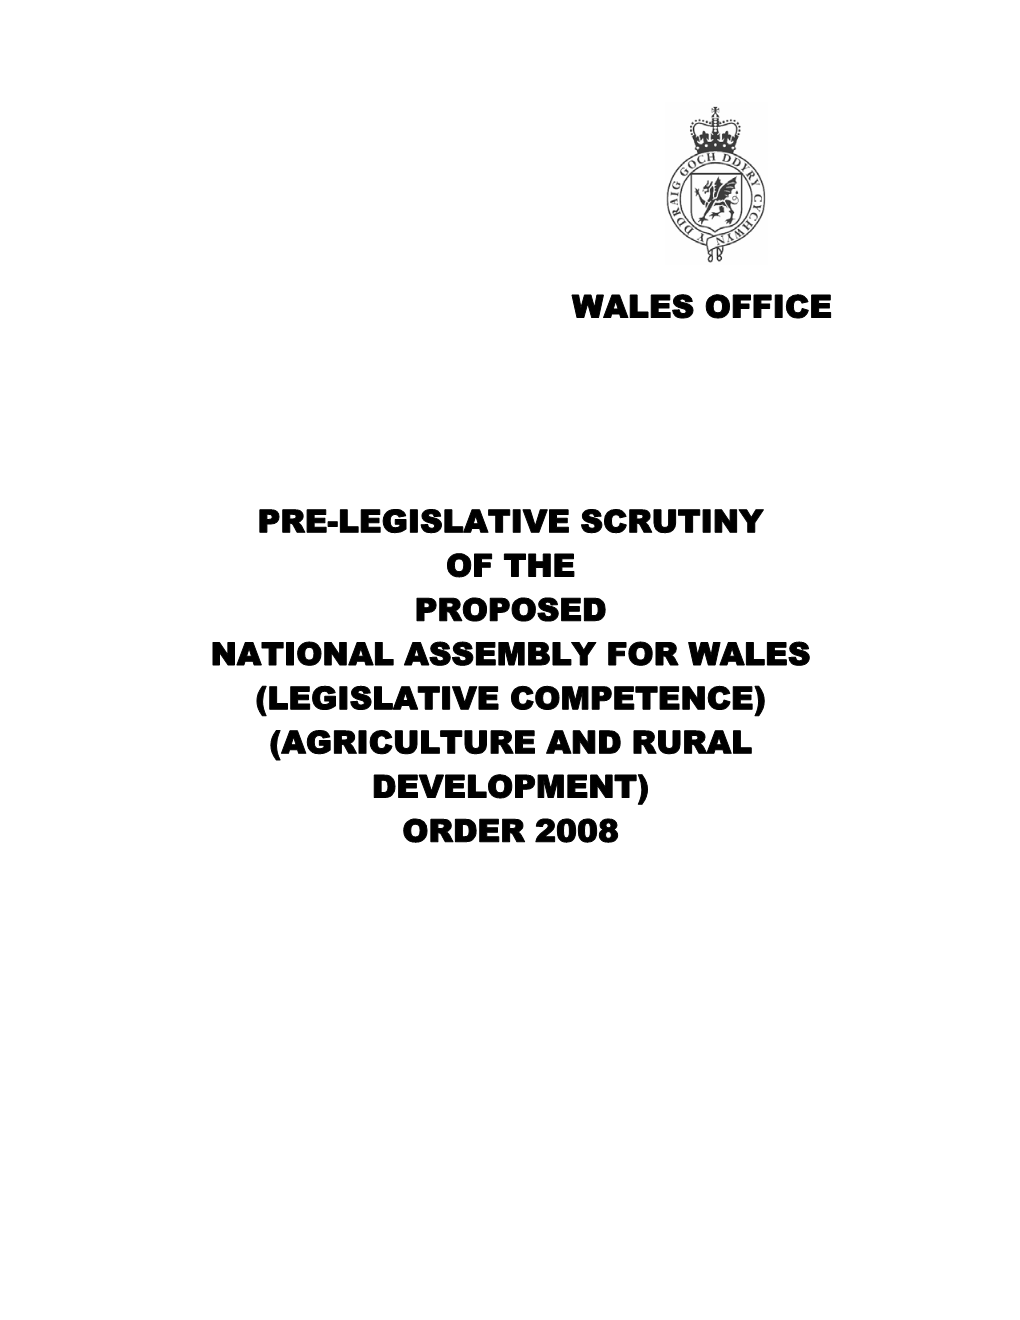 Pre-Legislative Scrutiny of the Proposed National Assembly for Wales (Legislative Competence) (Agriculture and Rural Development) Order 2008